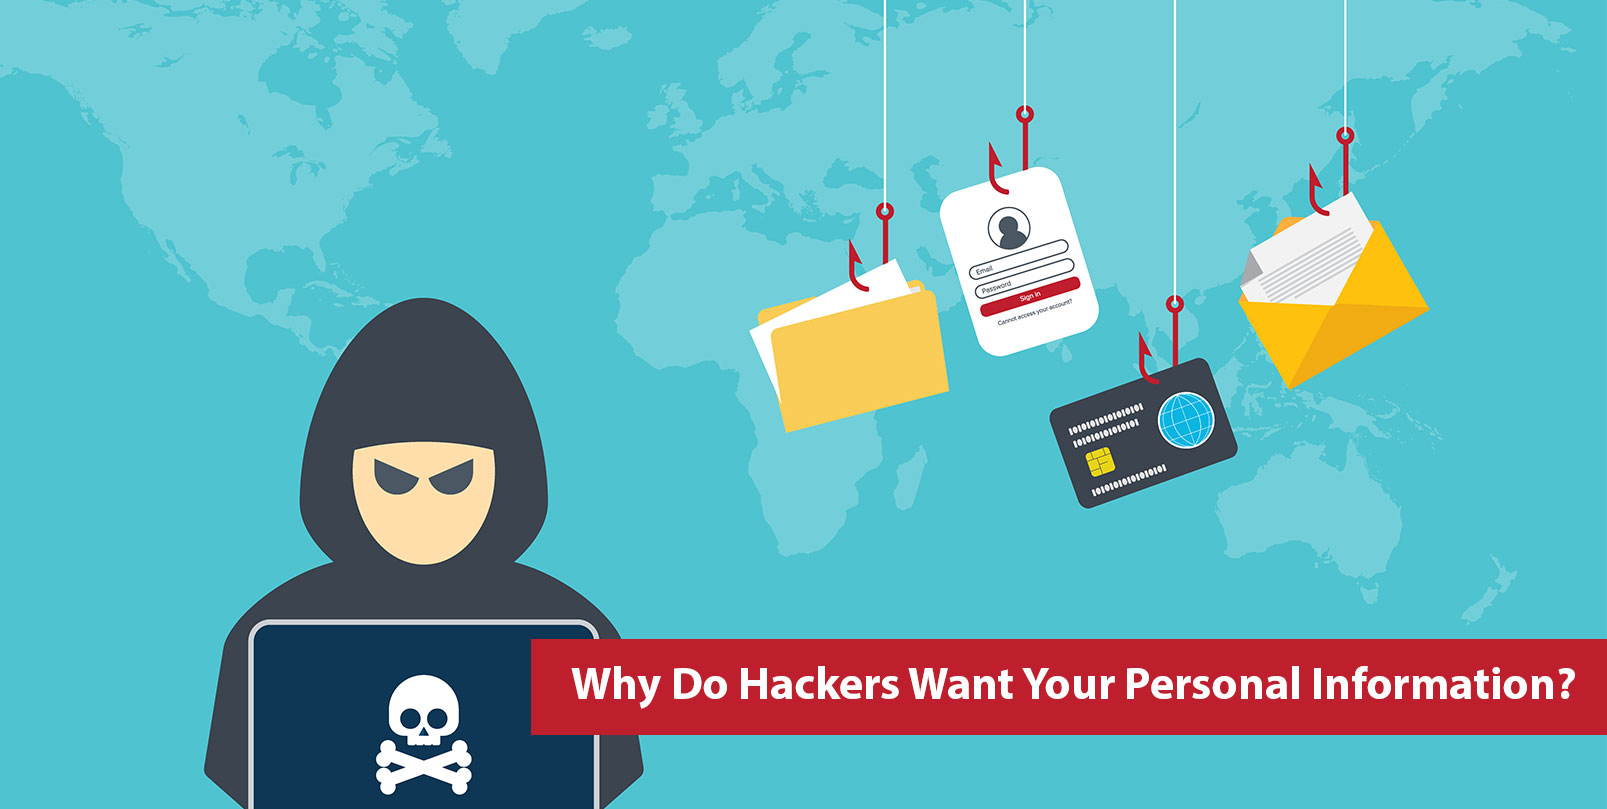 Why Do Hackers Want Your Personal Information?